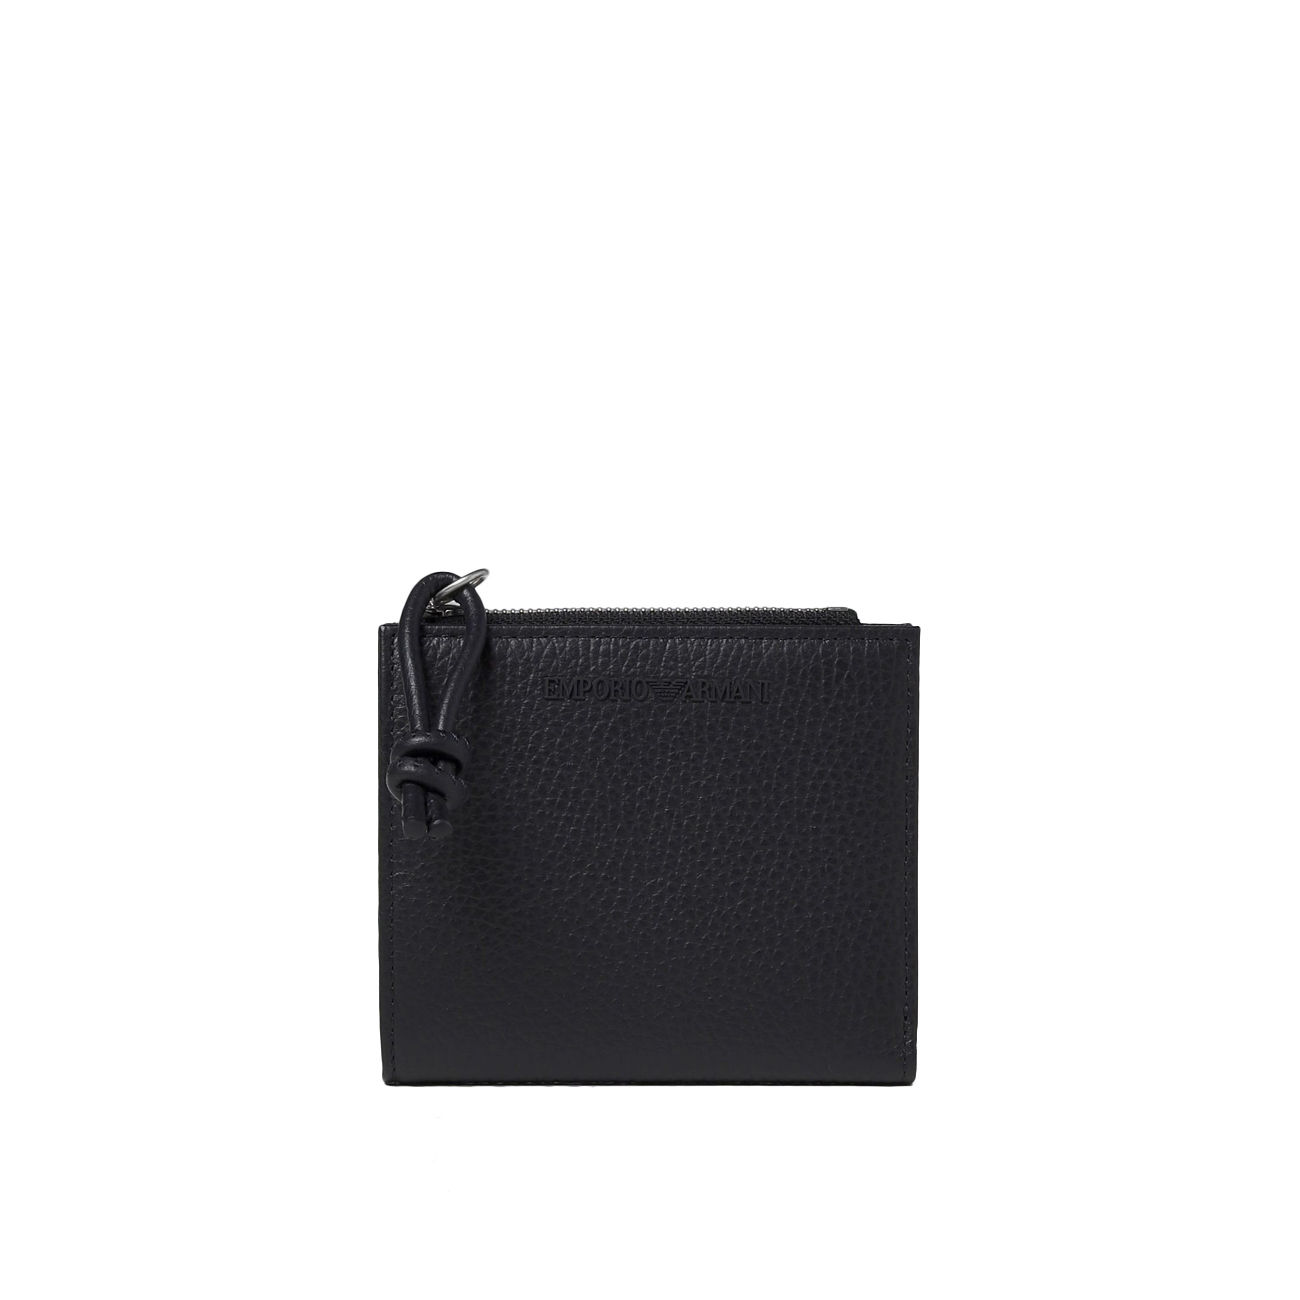 Buy Emporio Armani Men Black Textured BI-Fold Wallet with Coin Pocket  Online - 913985 | The Collective